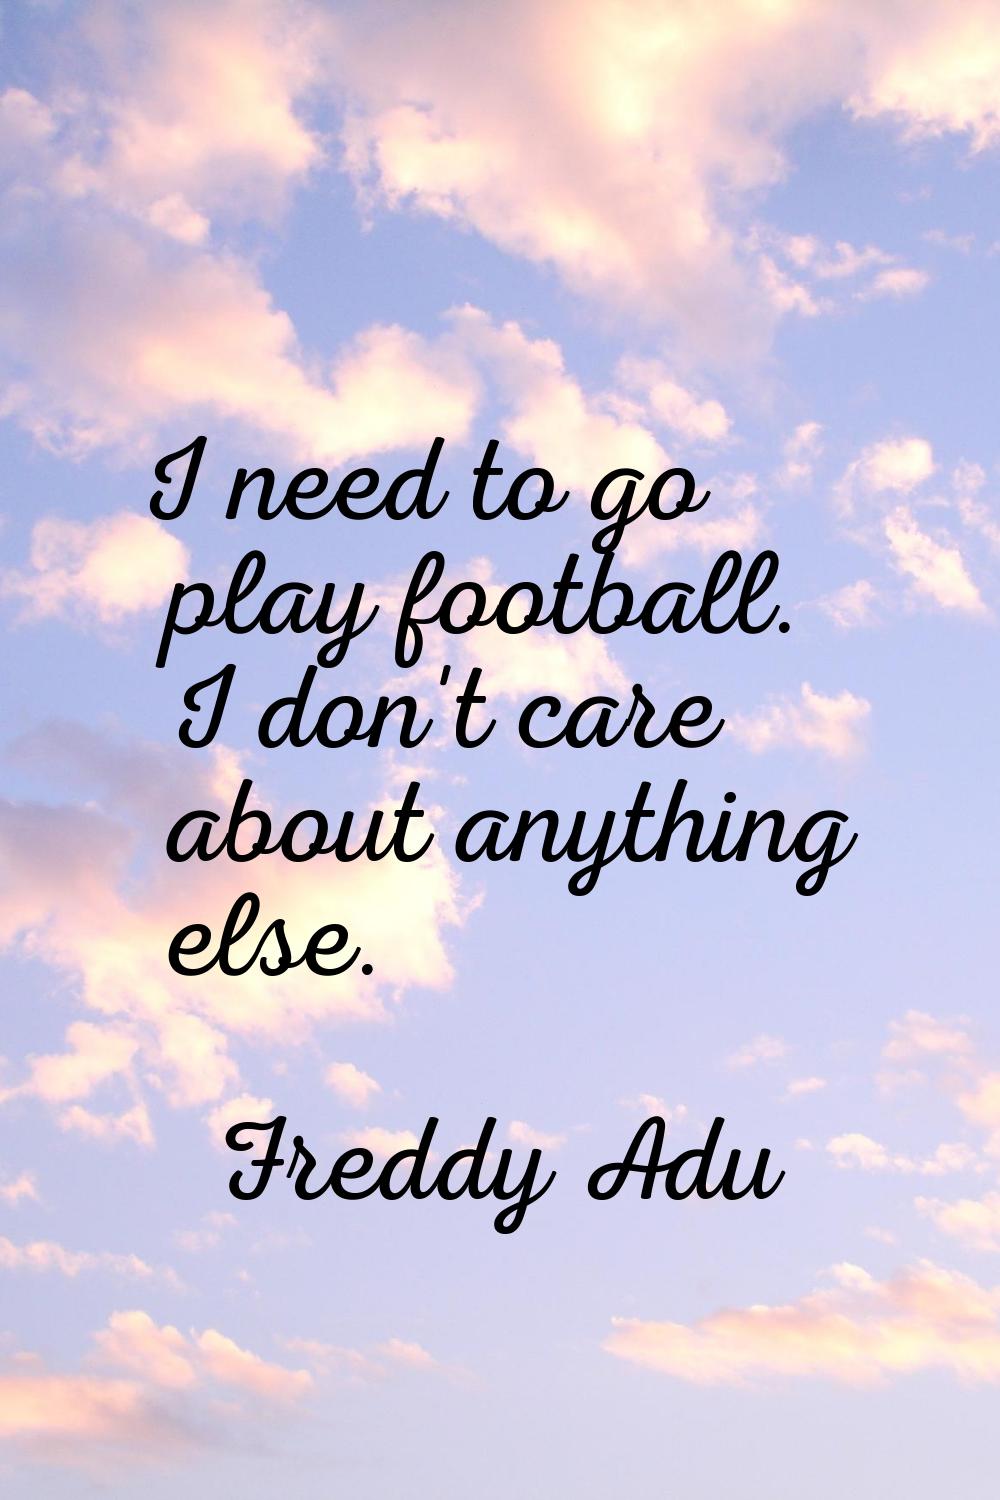 I need to go play football. I don't care about anything else.